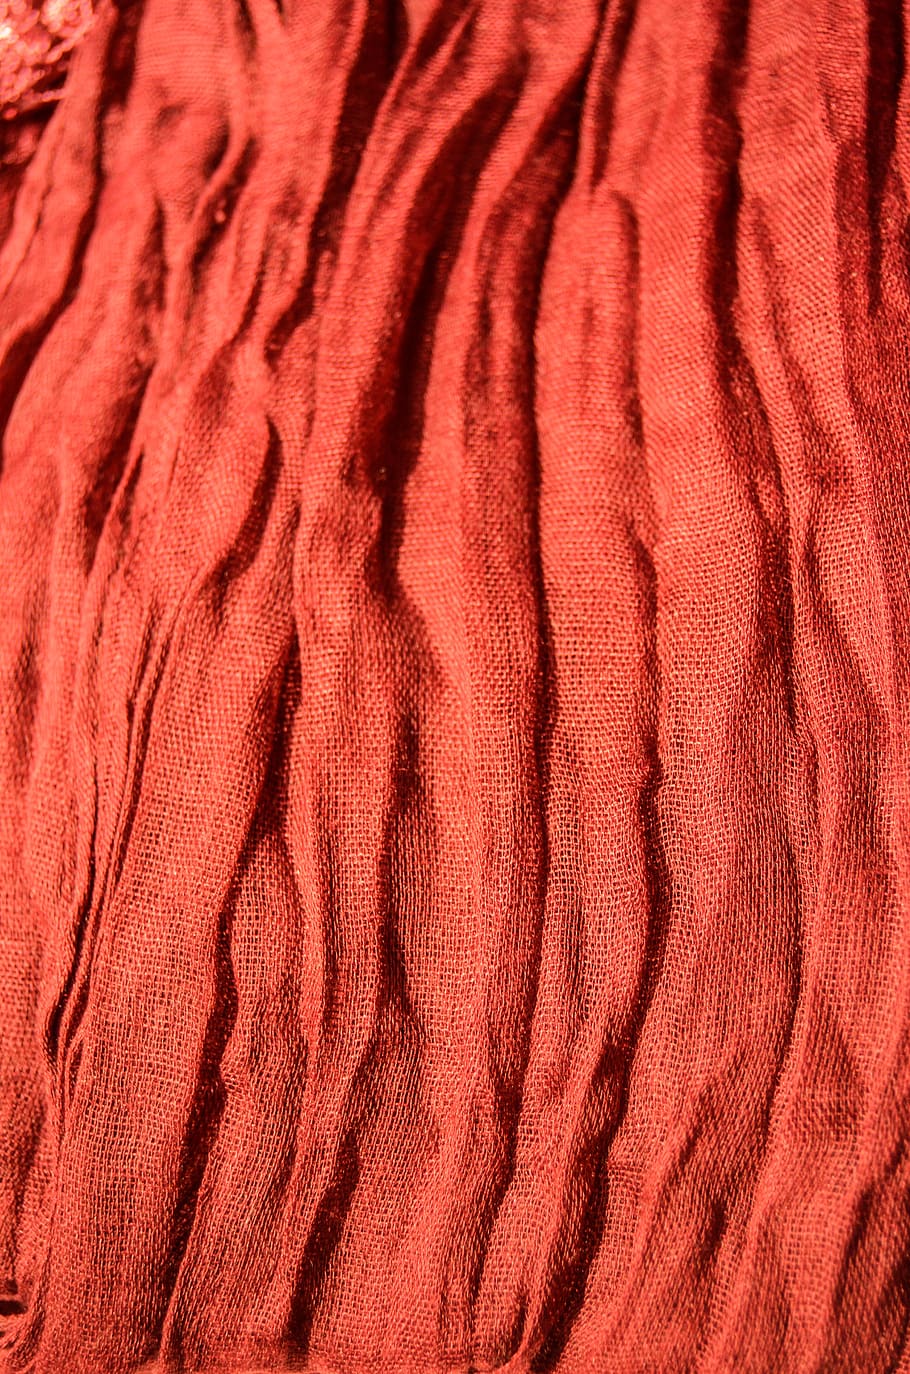 material, web, texture, the background, red, color, textile, backgrounds, full frame, pattern